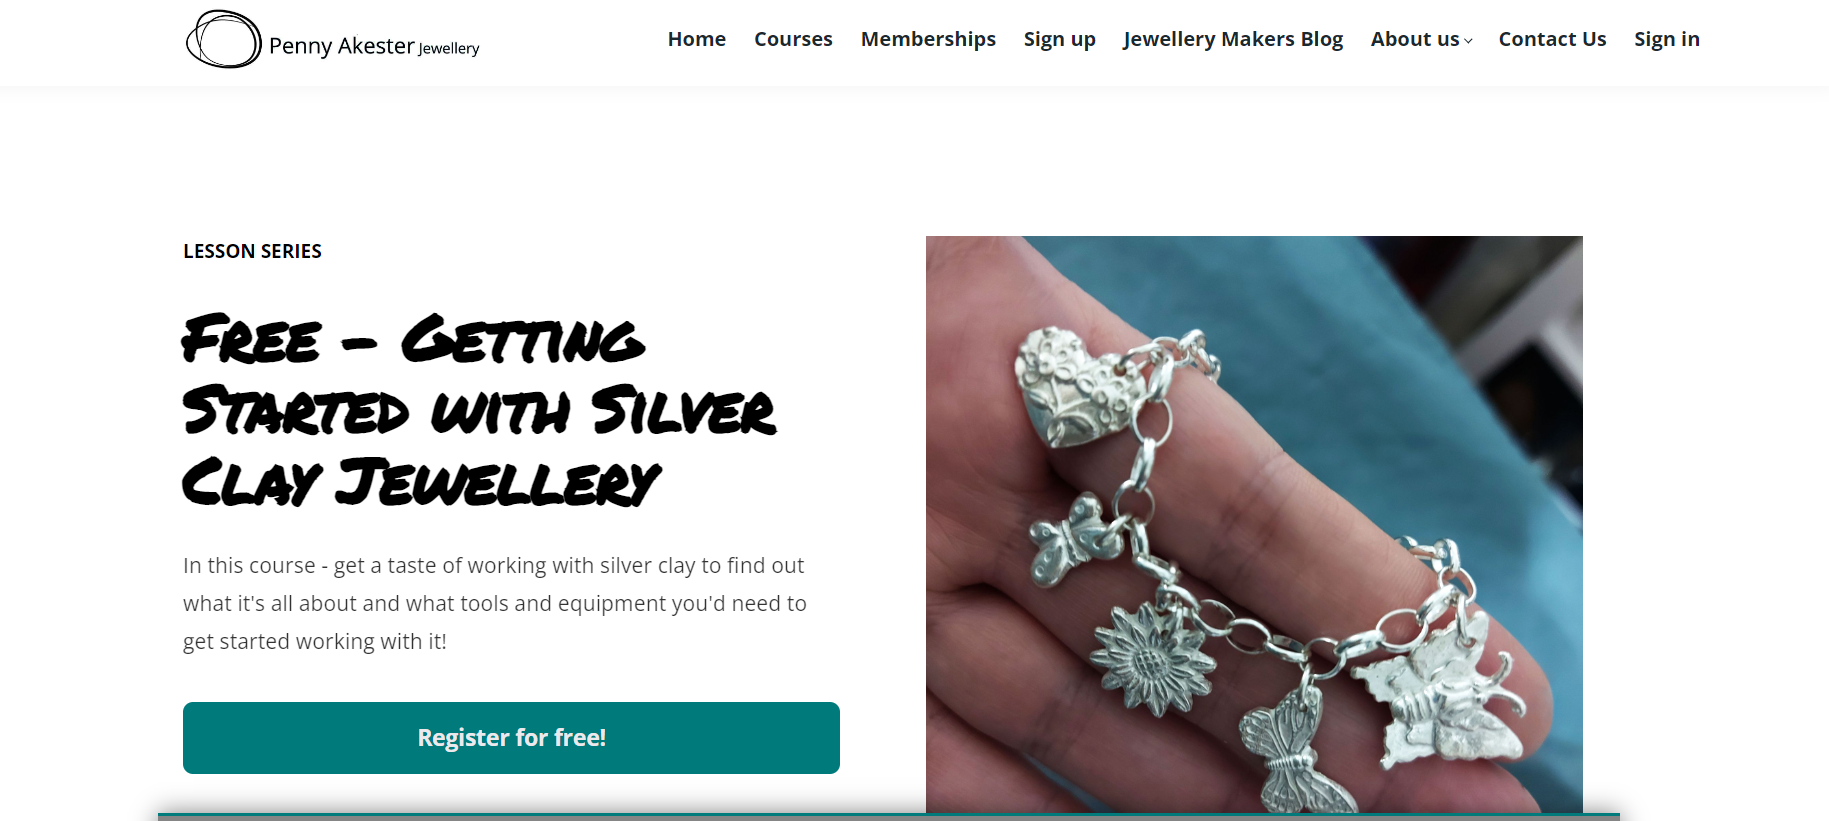 Getting Started with Silver Clay Jewelry